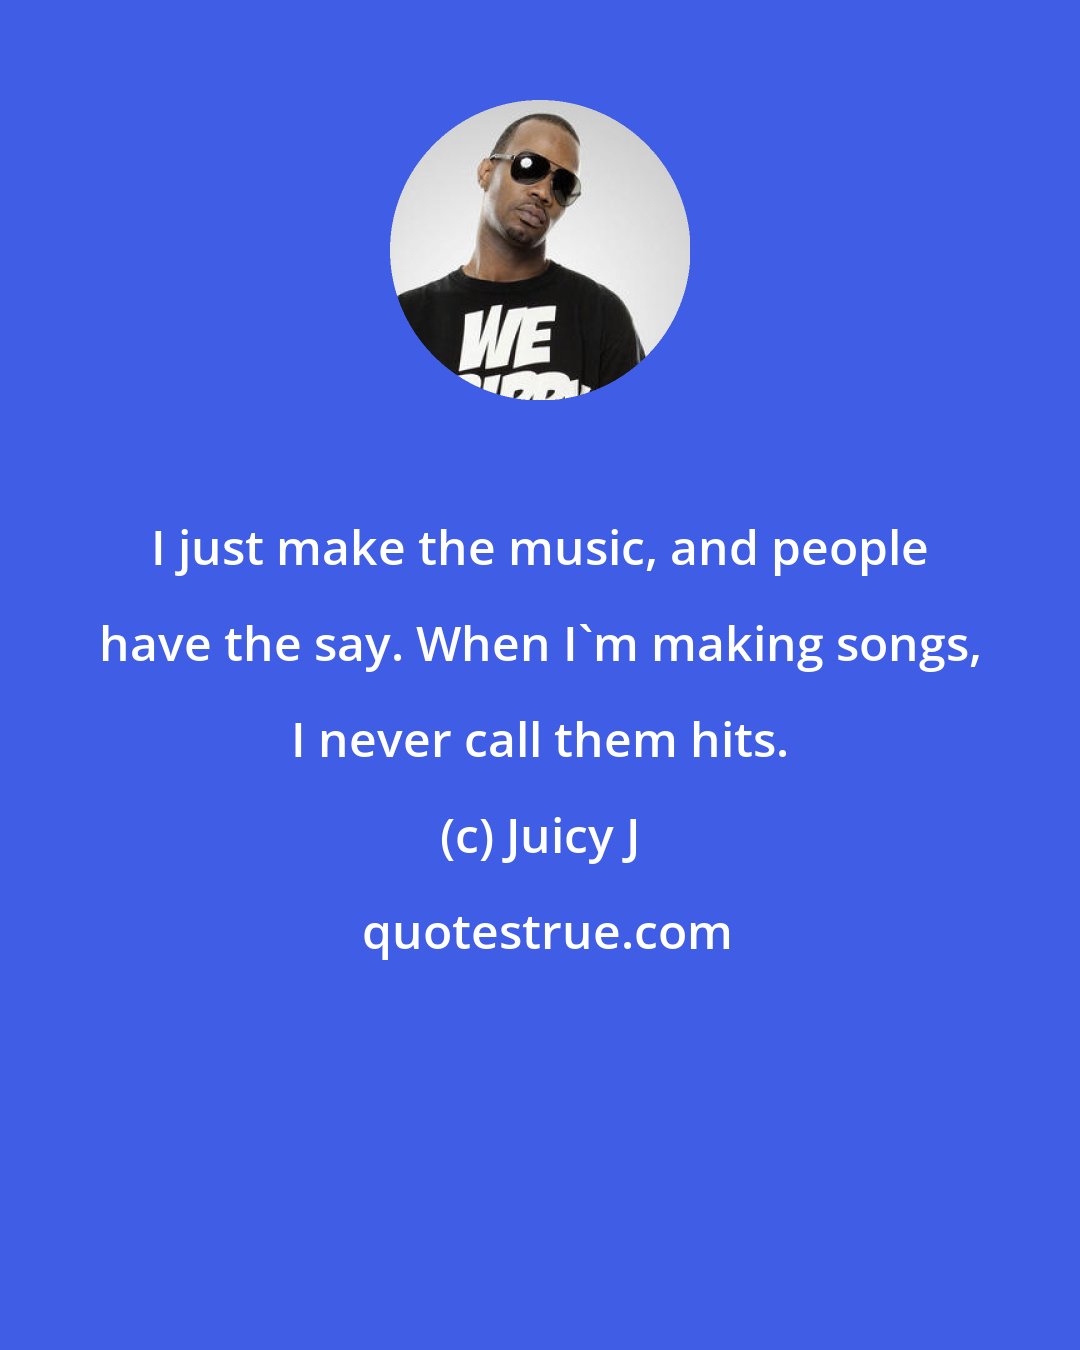 Juicy J: I just make the music, and people have the say. When I'm making songs, I never call them hits.